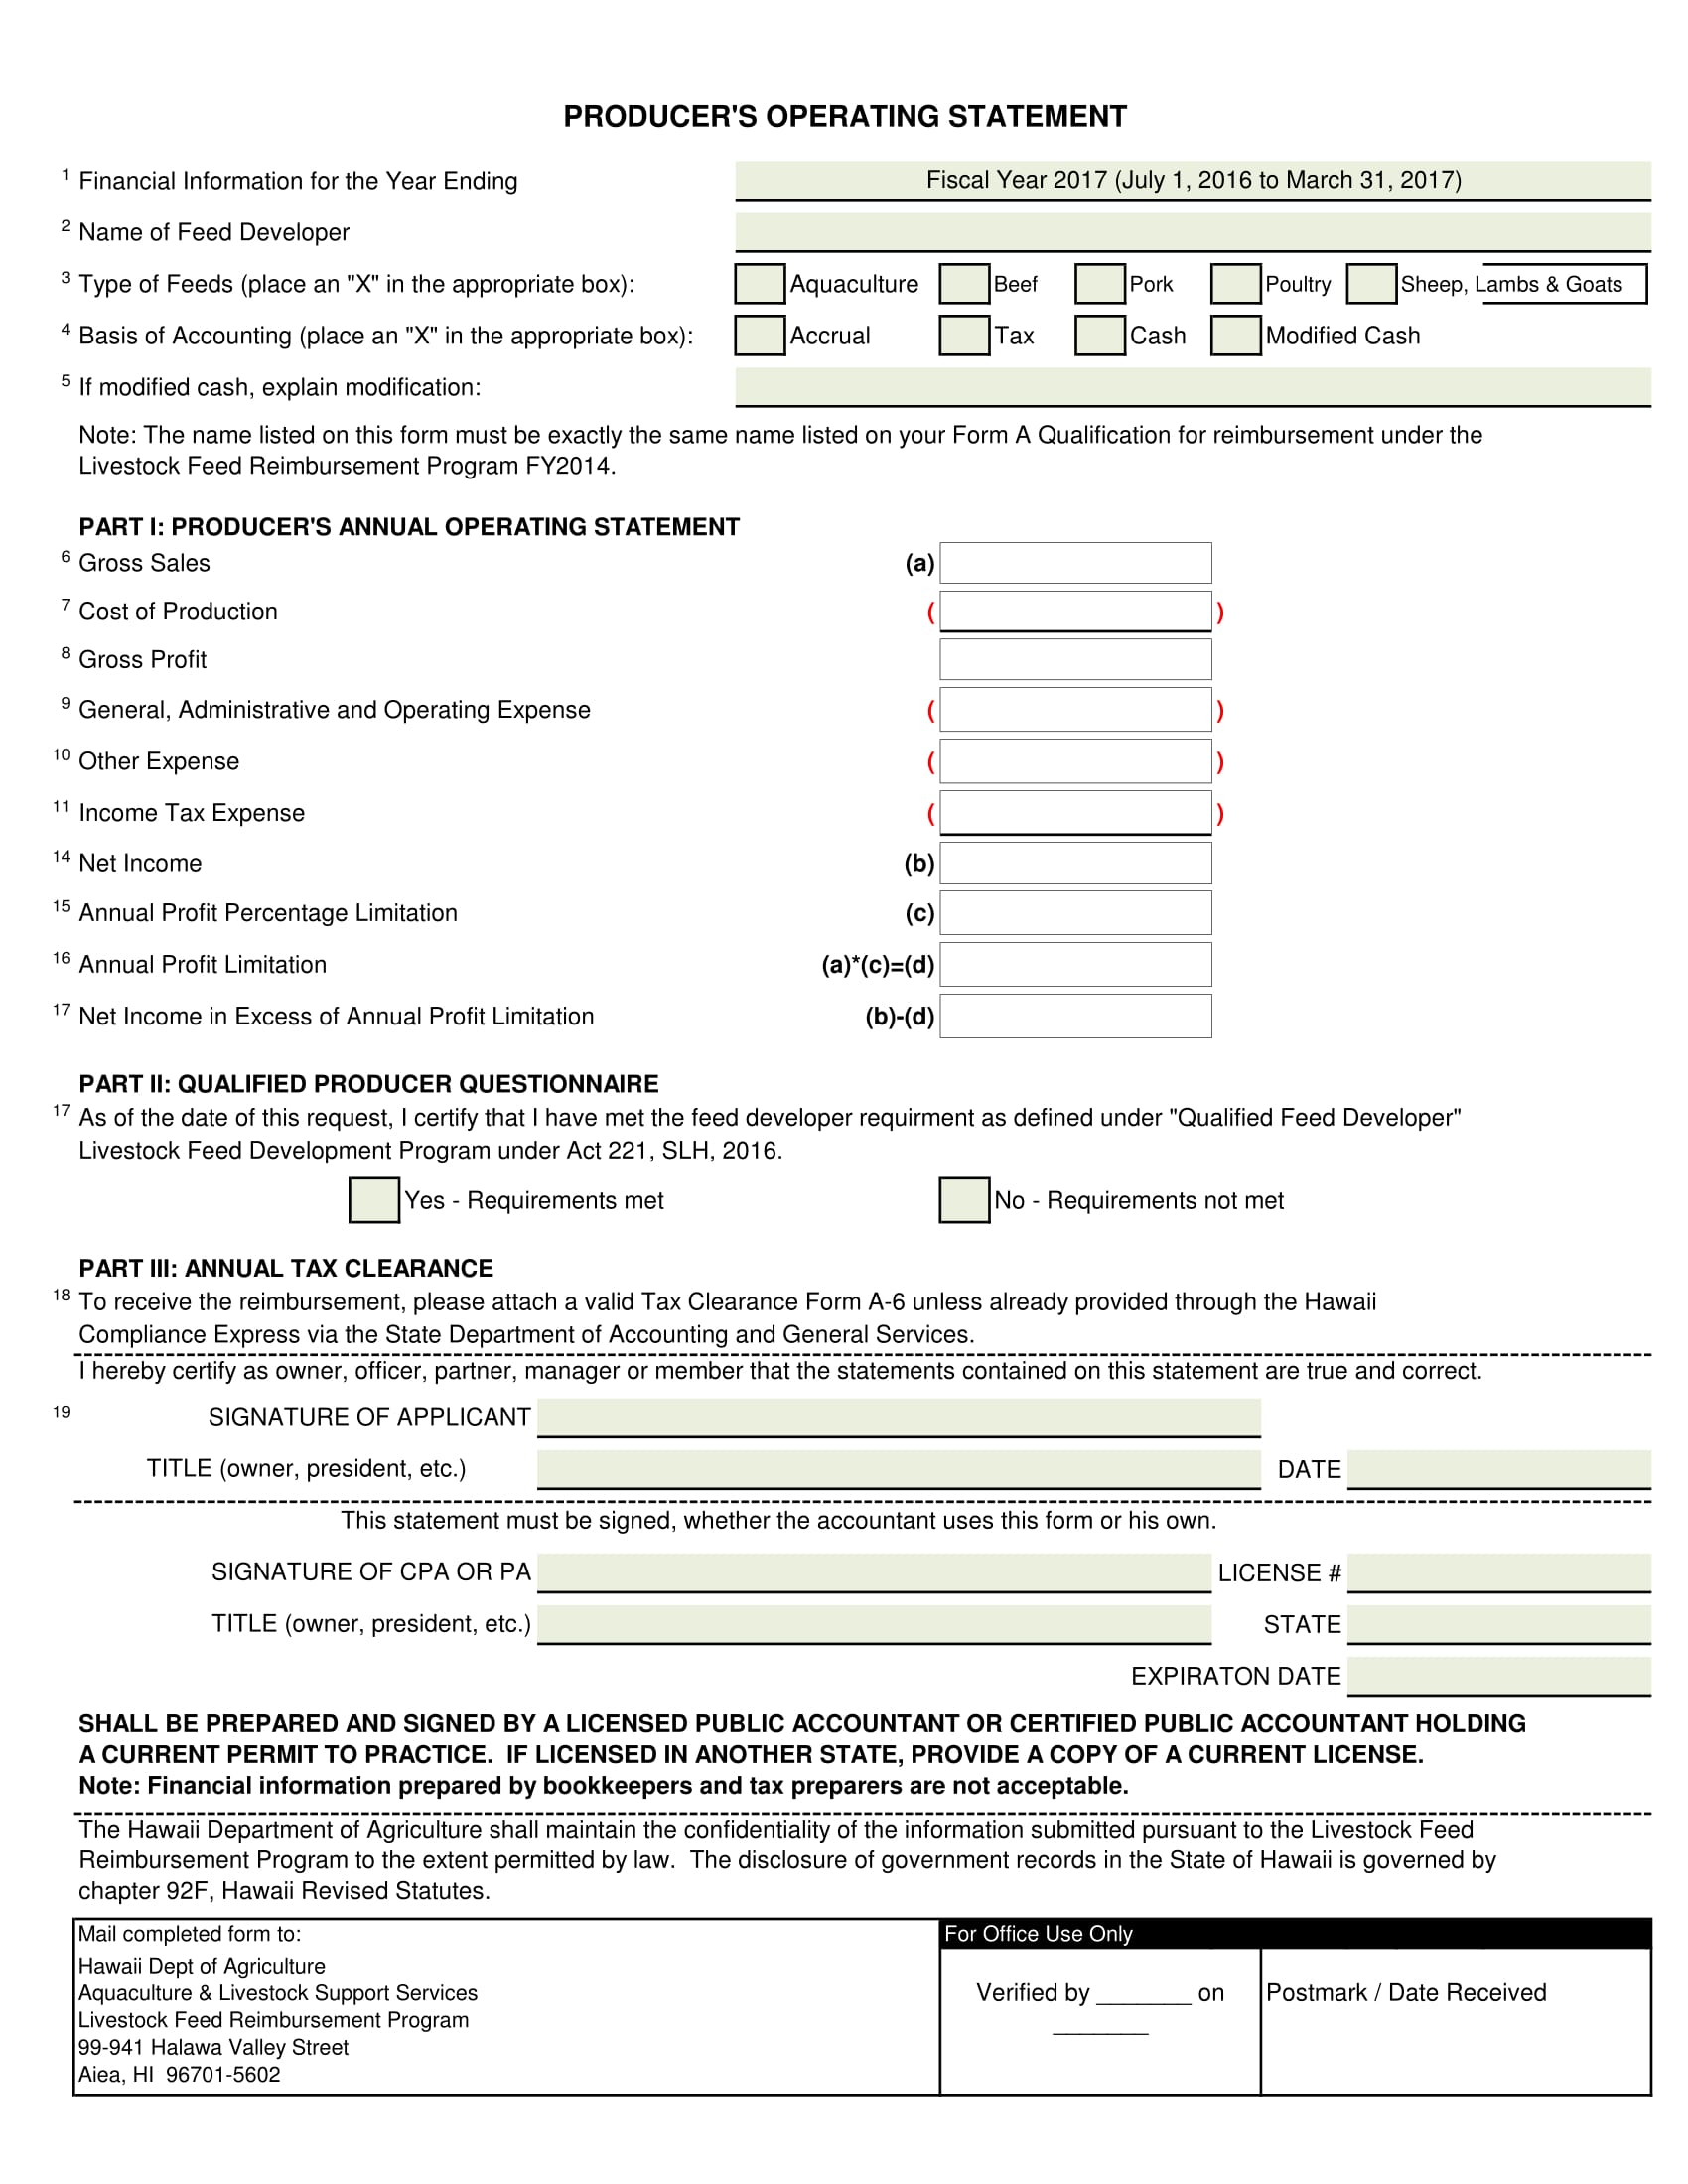 producer operating statement form 1